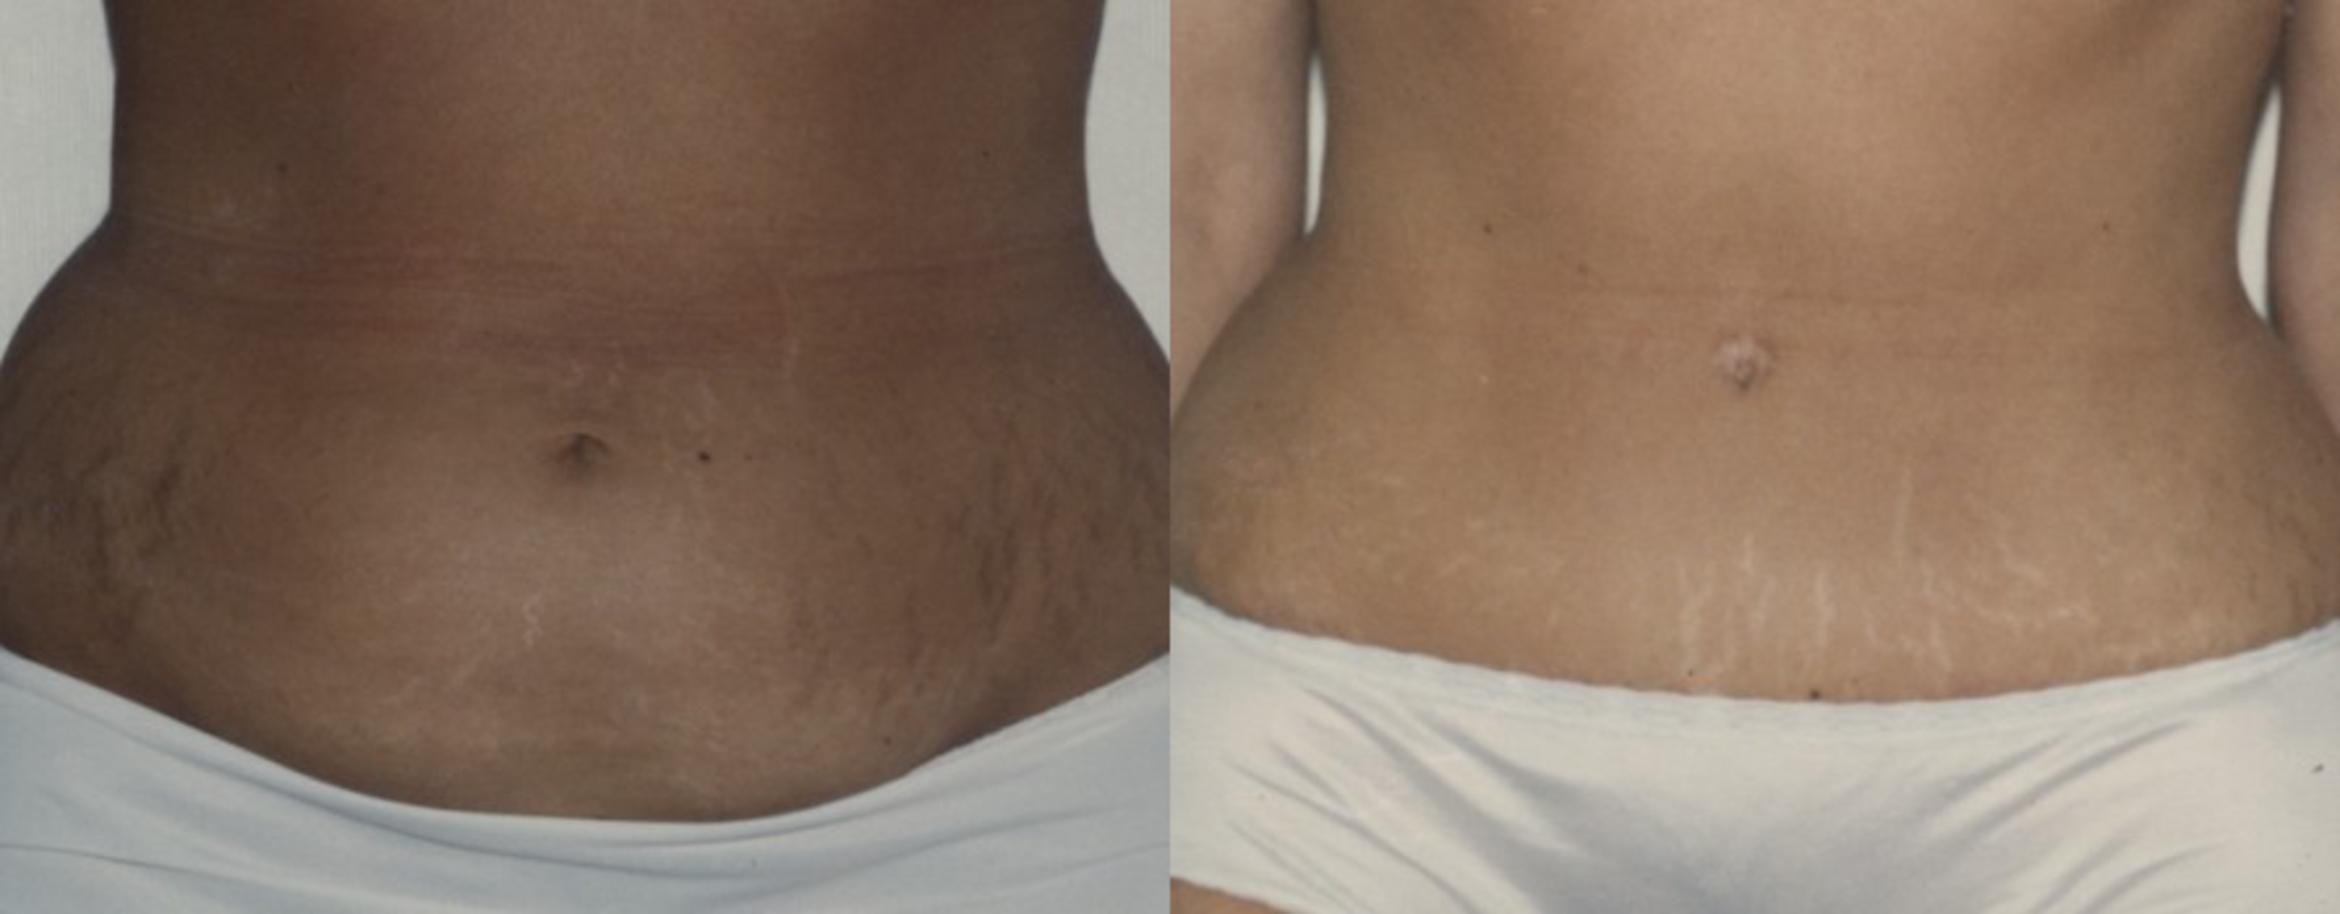 Abdominoplasty (Tummy Tuck) Before & After Photo | New Jersey & Pennsylvania,  | The Derm Group